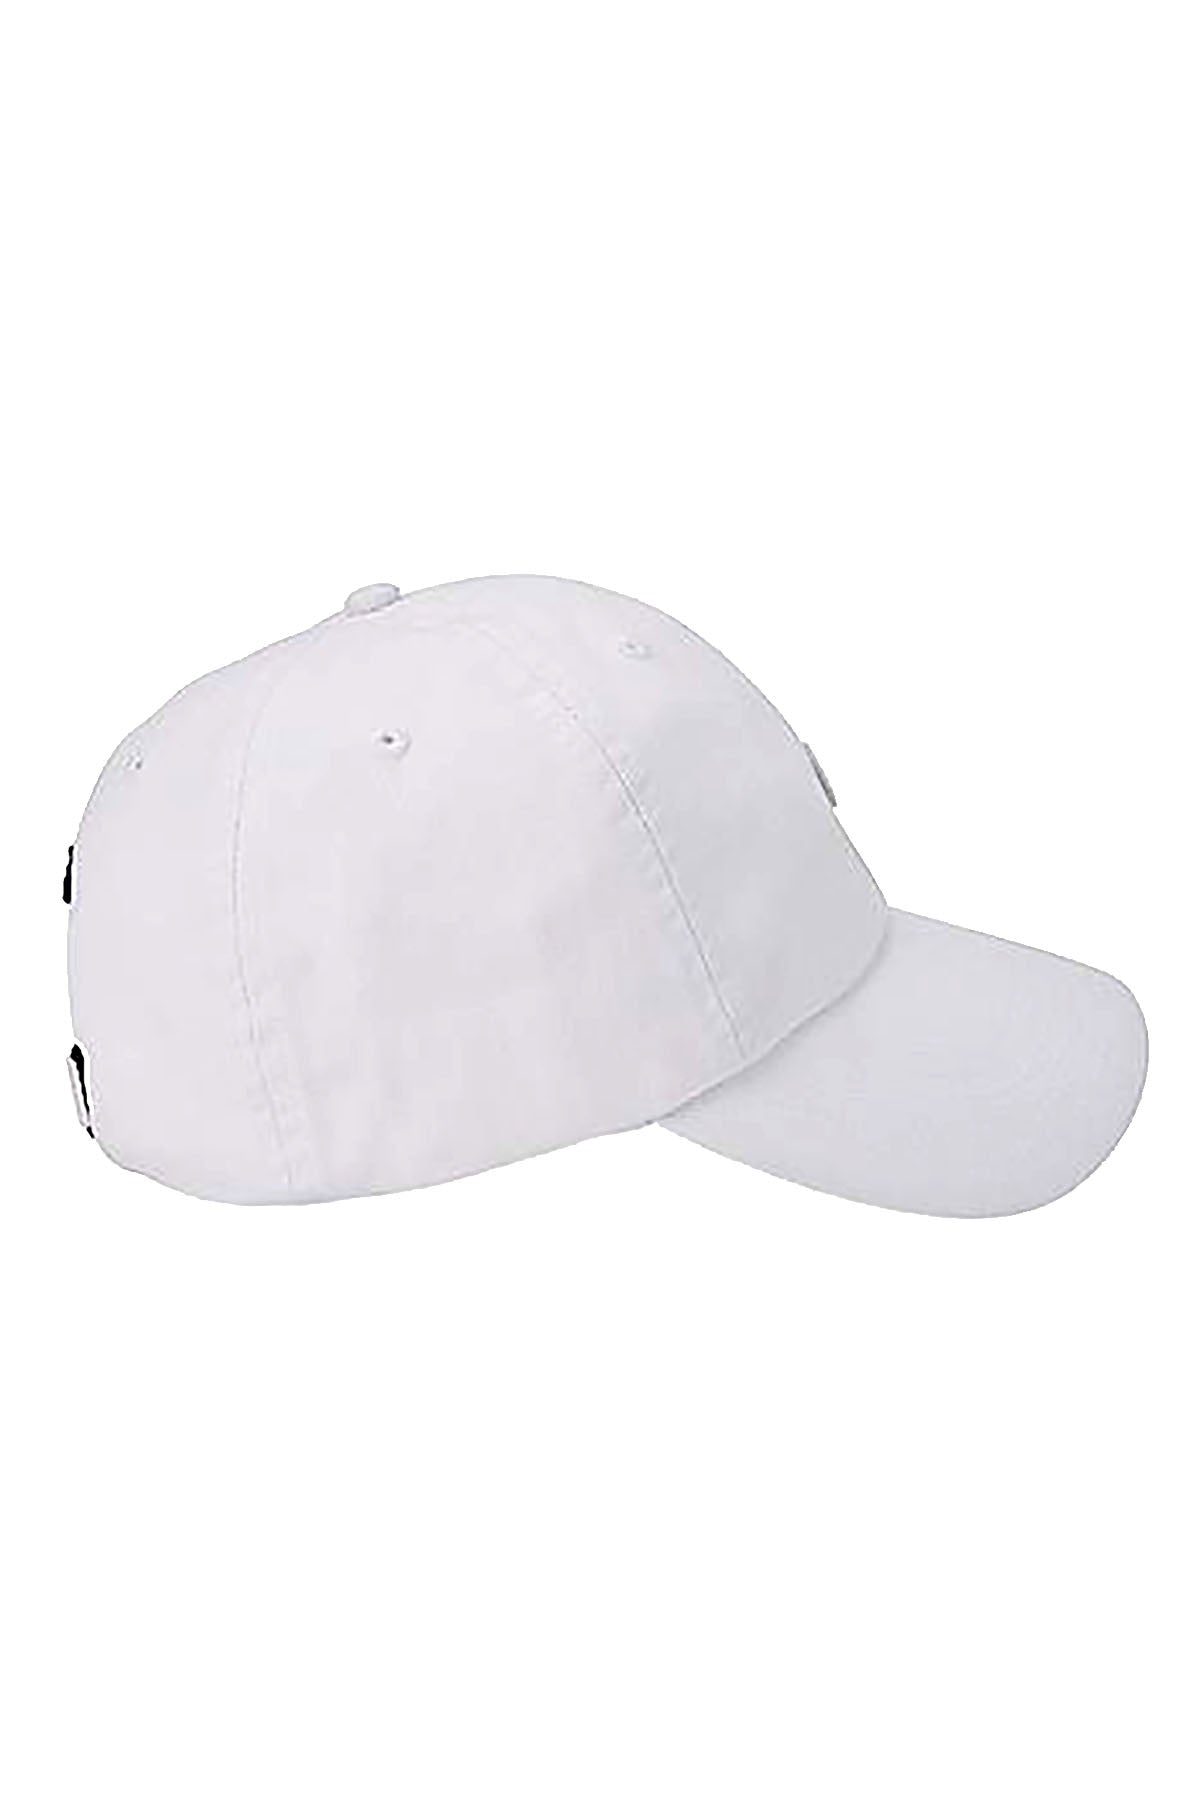 Champion White 'Our Father' Adjustable Dad Hat